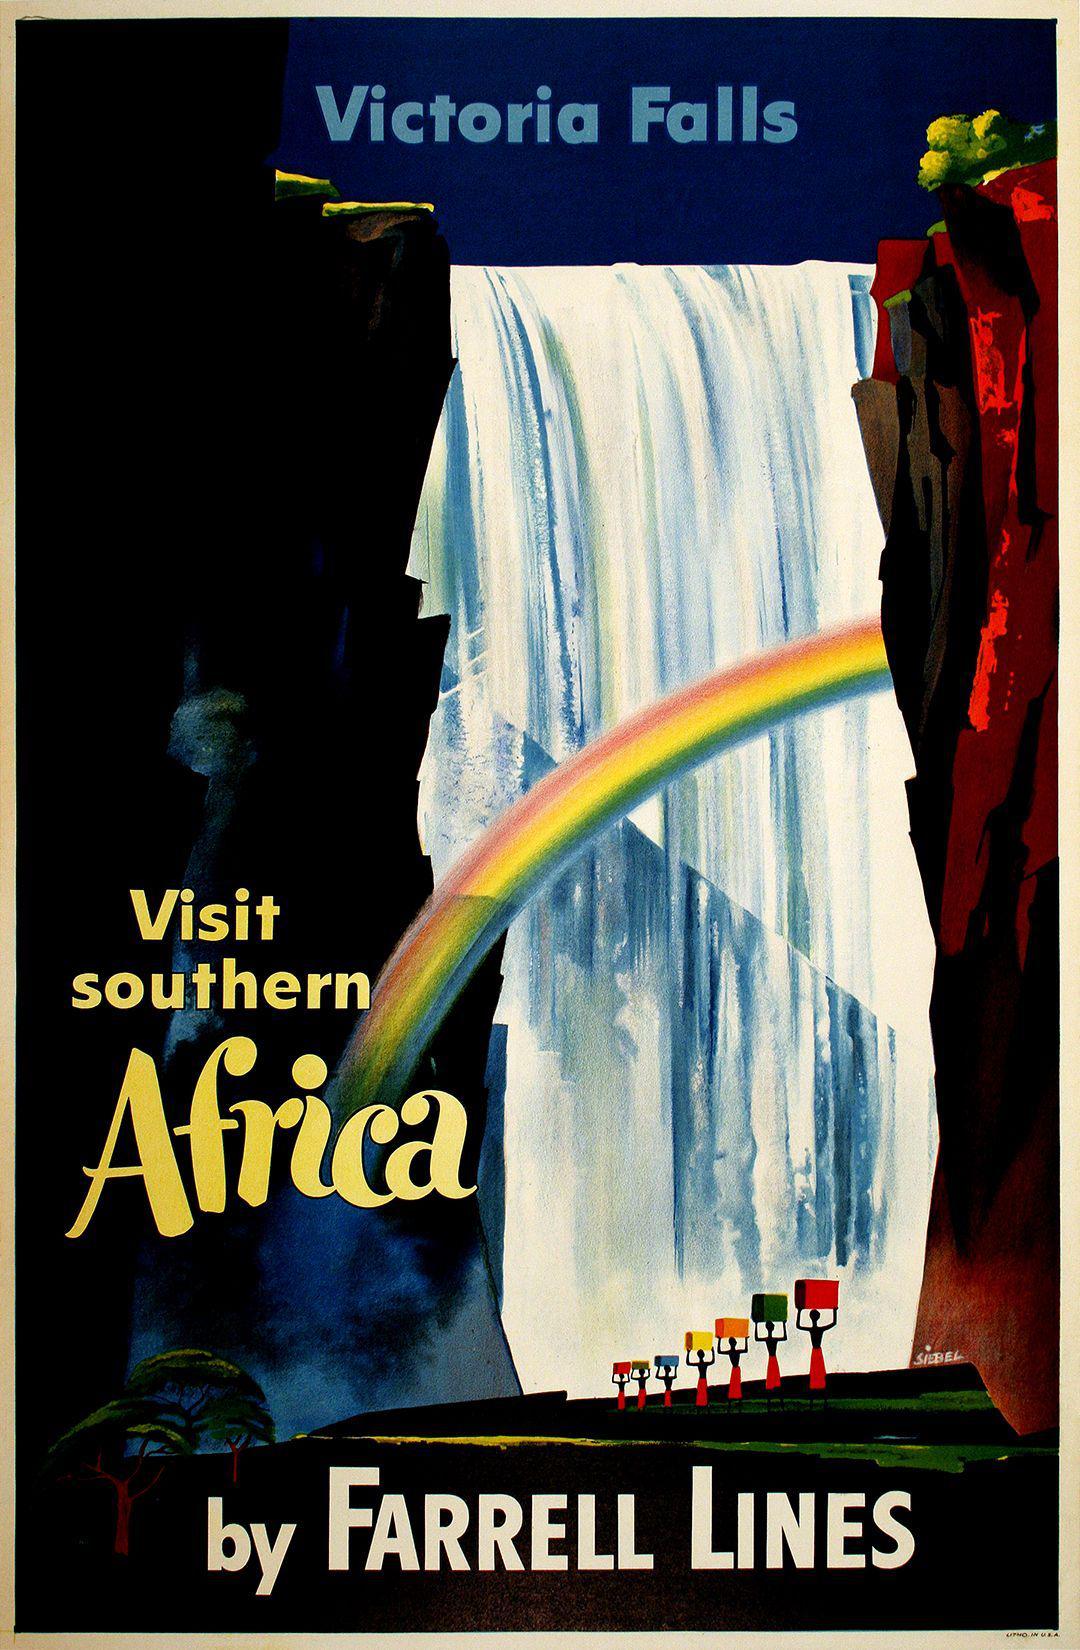 Original Victoria Falls Poster c1951 by Fred Seibel Visit Southern Africa by Farrell Lines